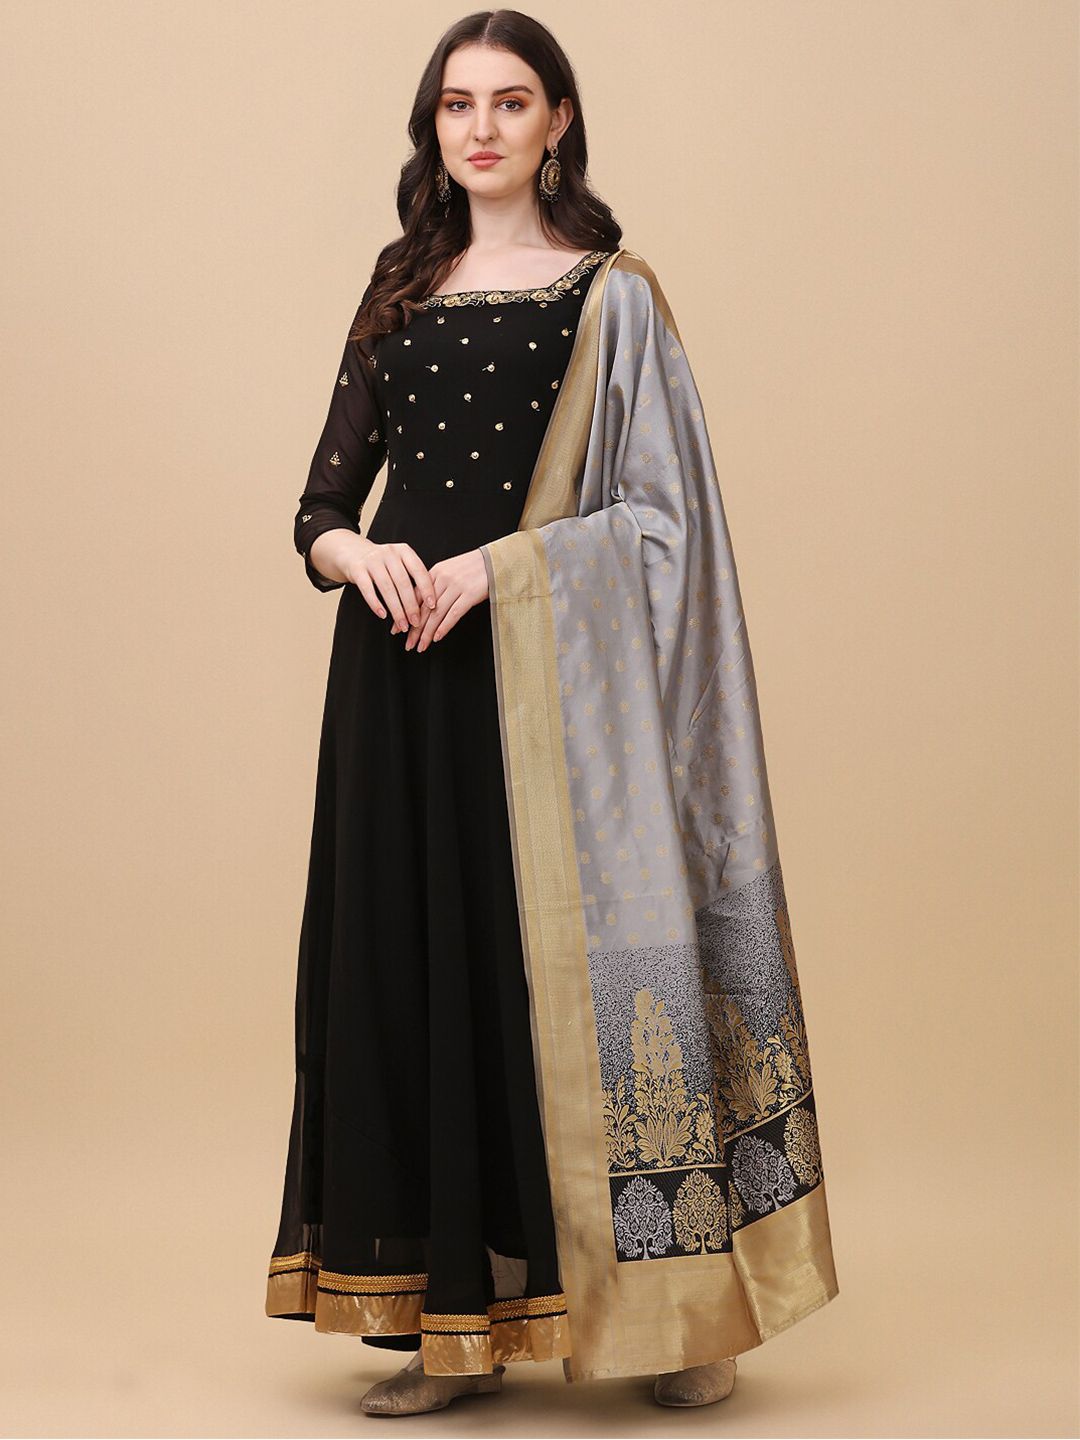 Vidraa Western Store Black Floral Georgette Ethnic Maxi Dress Price in India